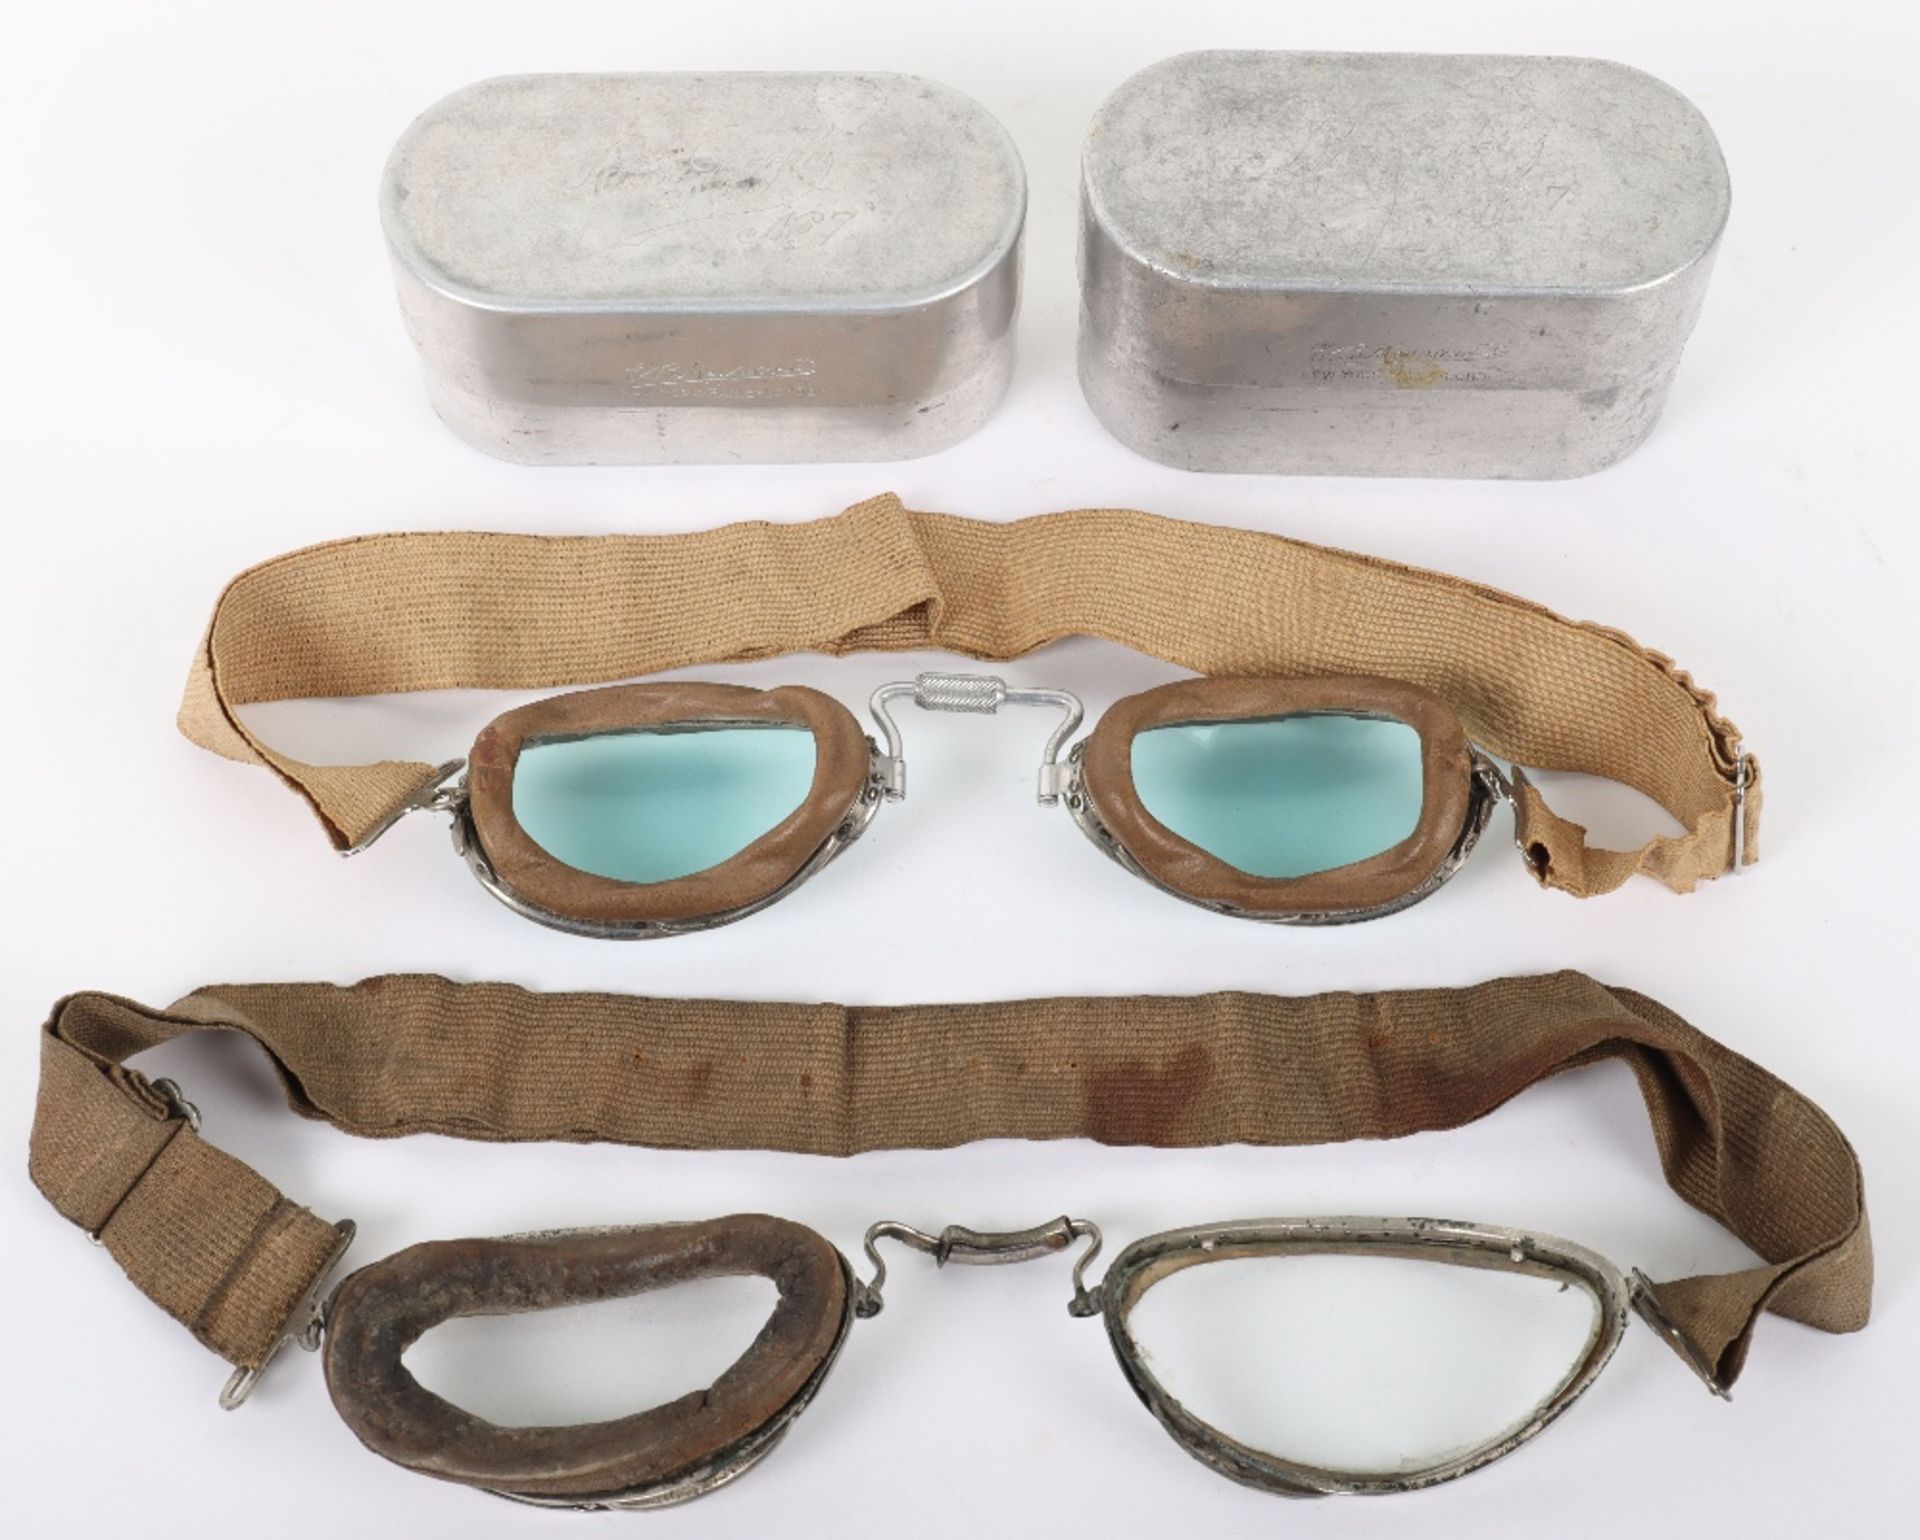 2x Pairs of Aviators Luxor Goggles No7 by E B Meyrowitz - Image 2 of 4